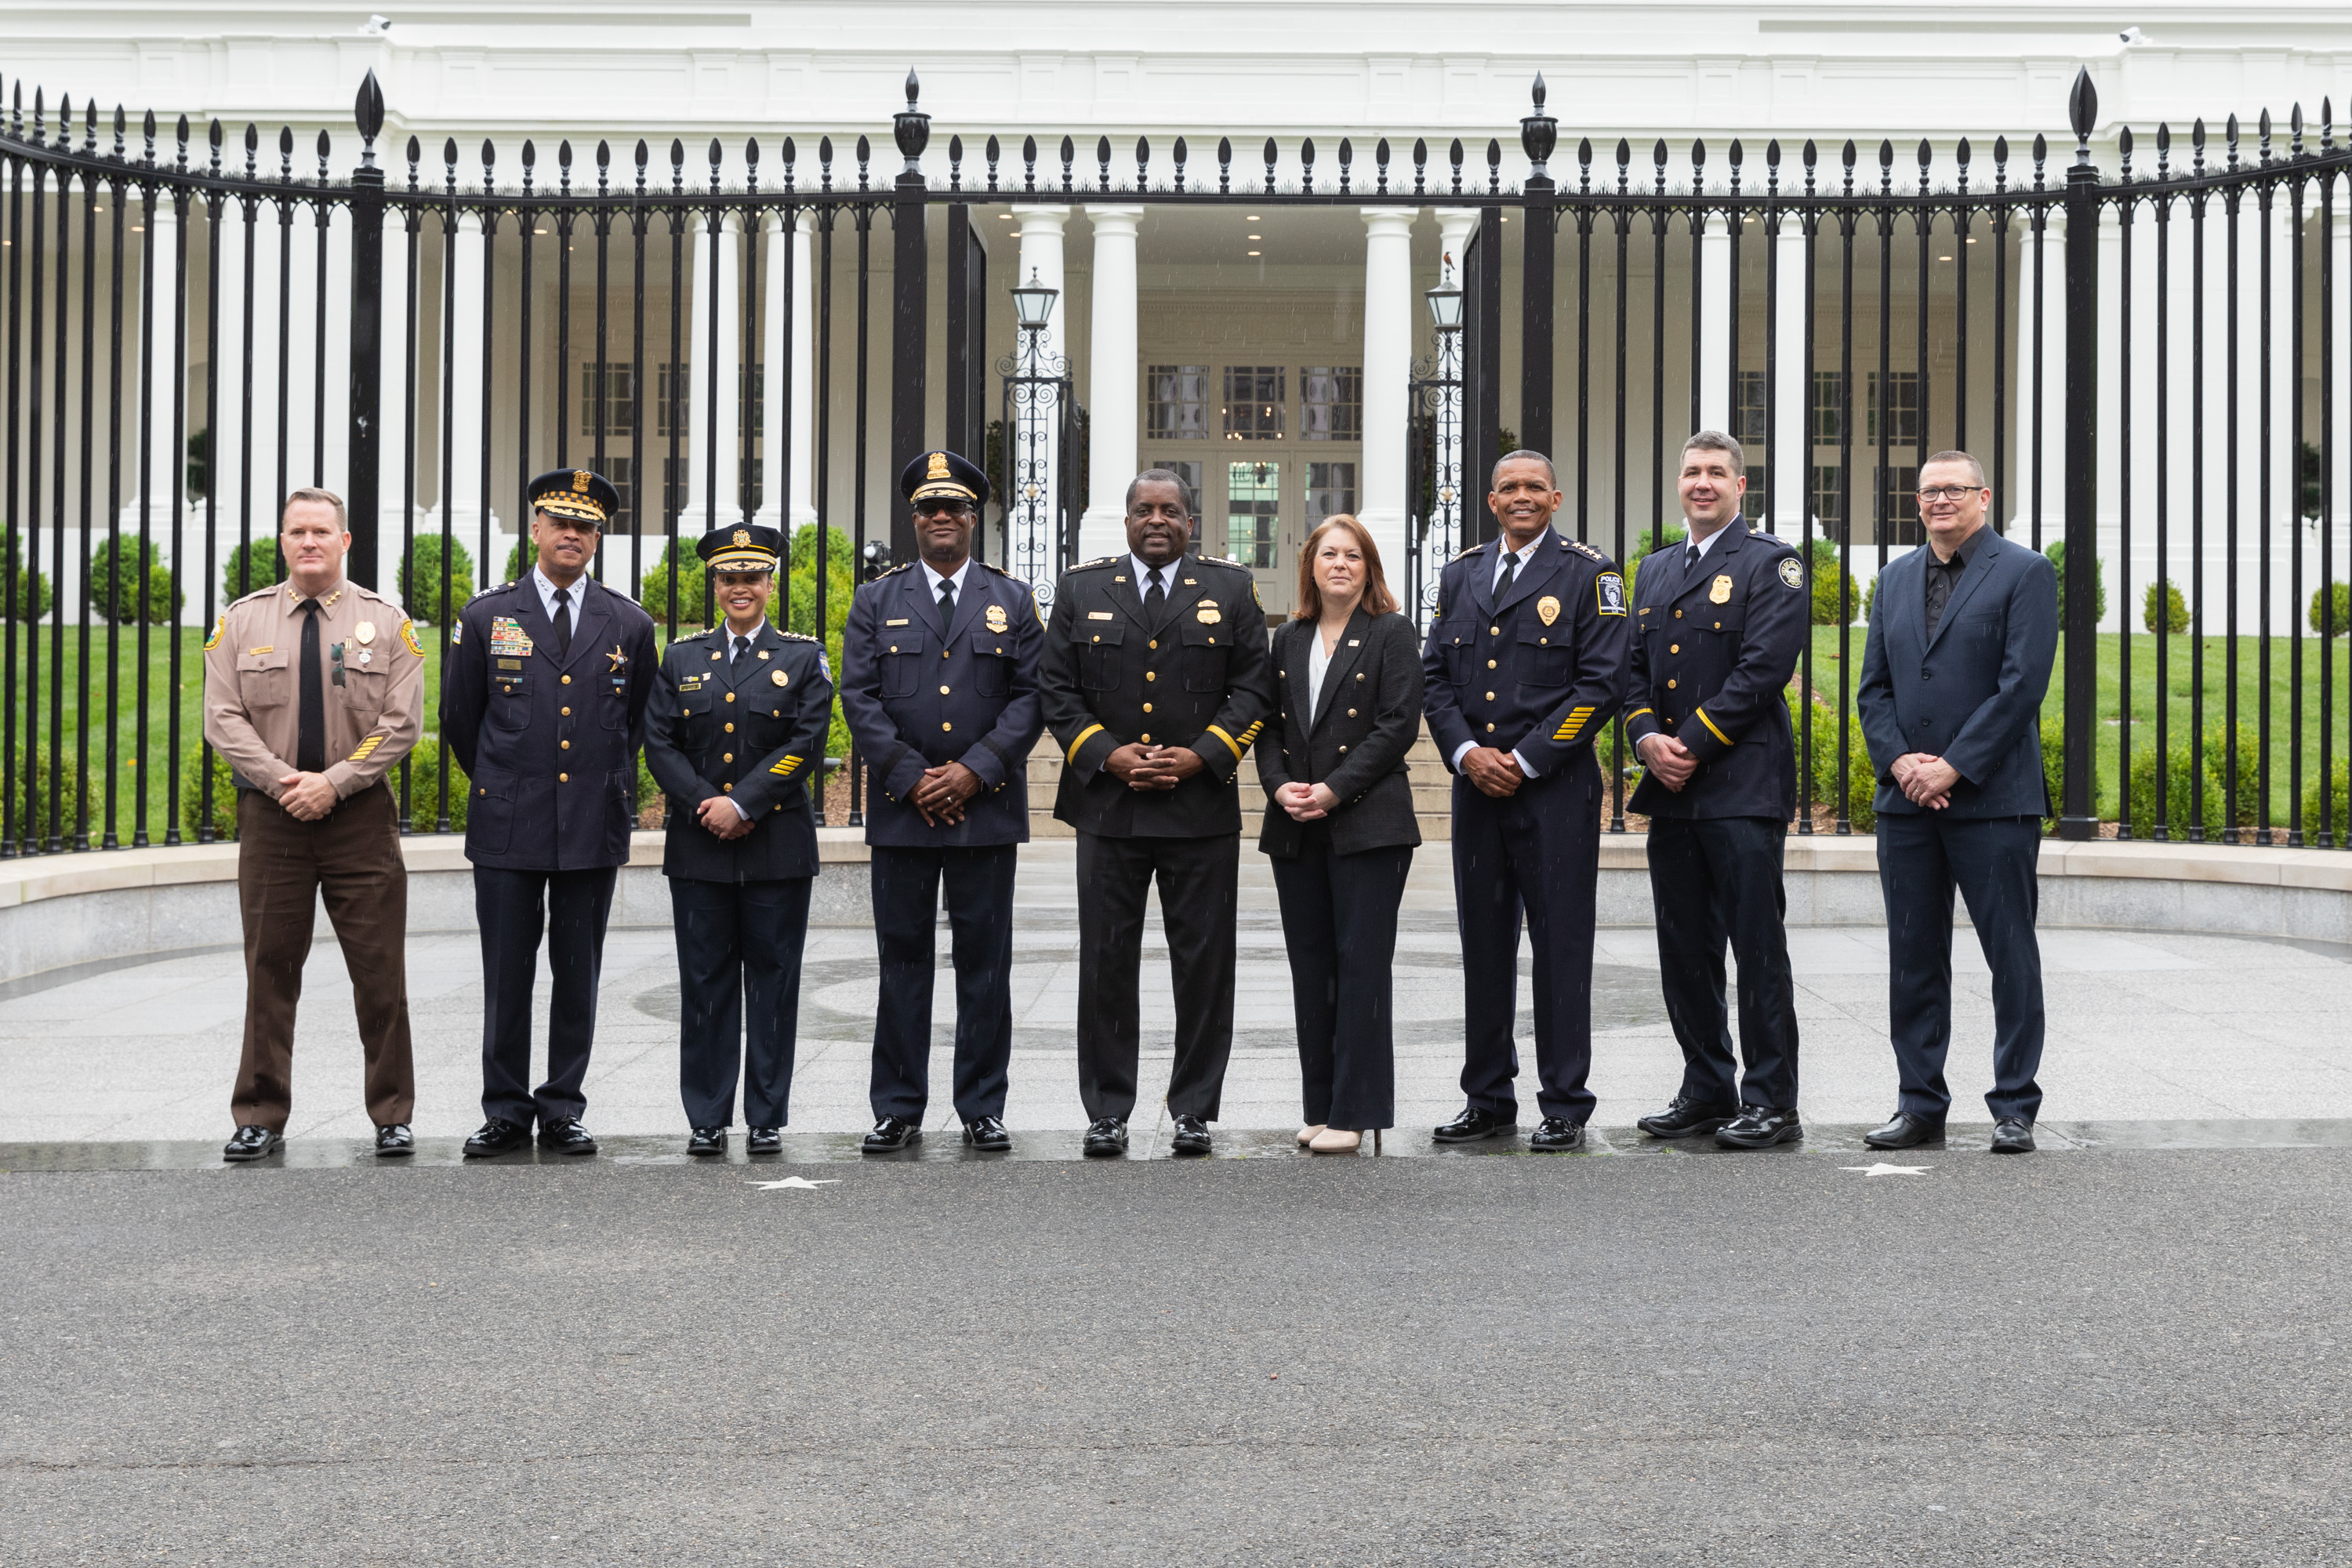 Police in dress uniforms standing in front of the White House